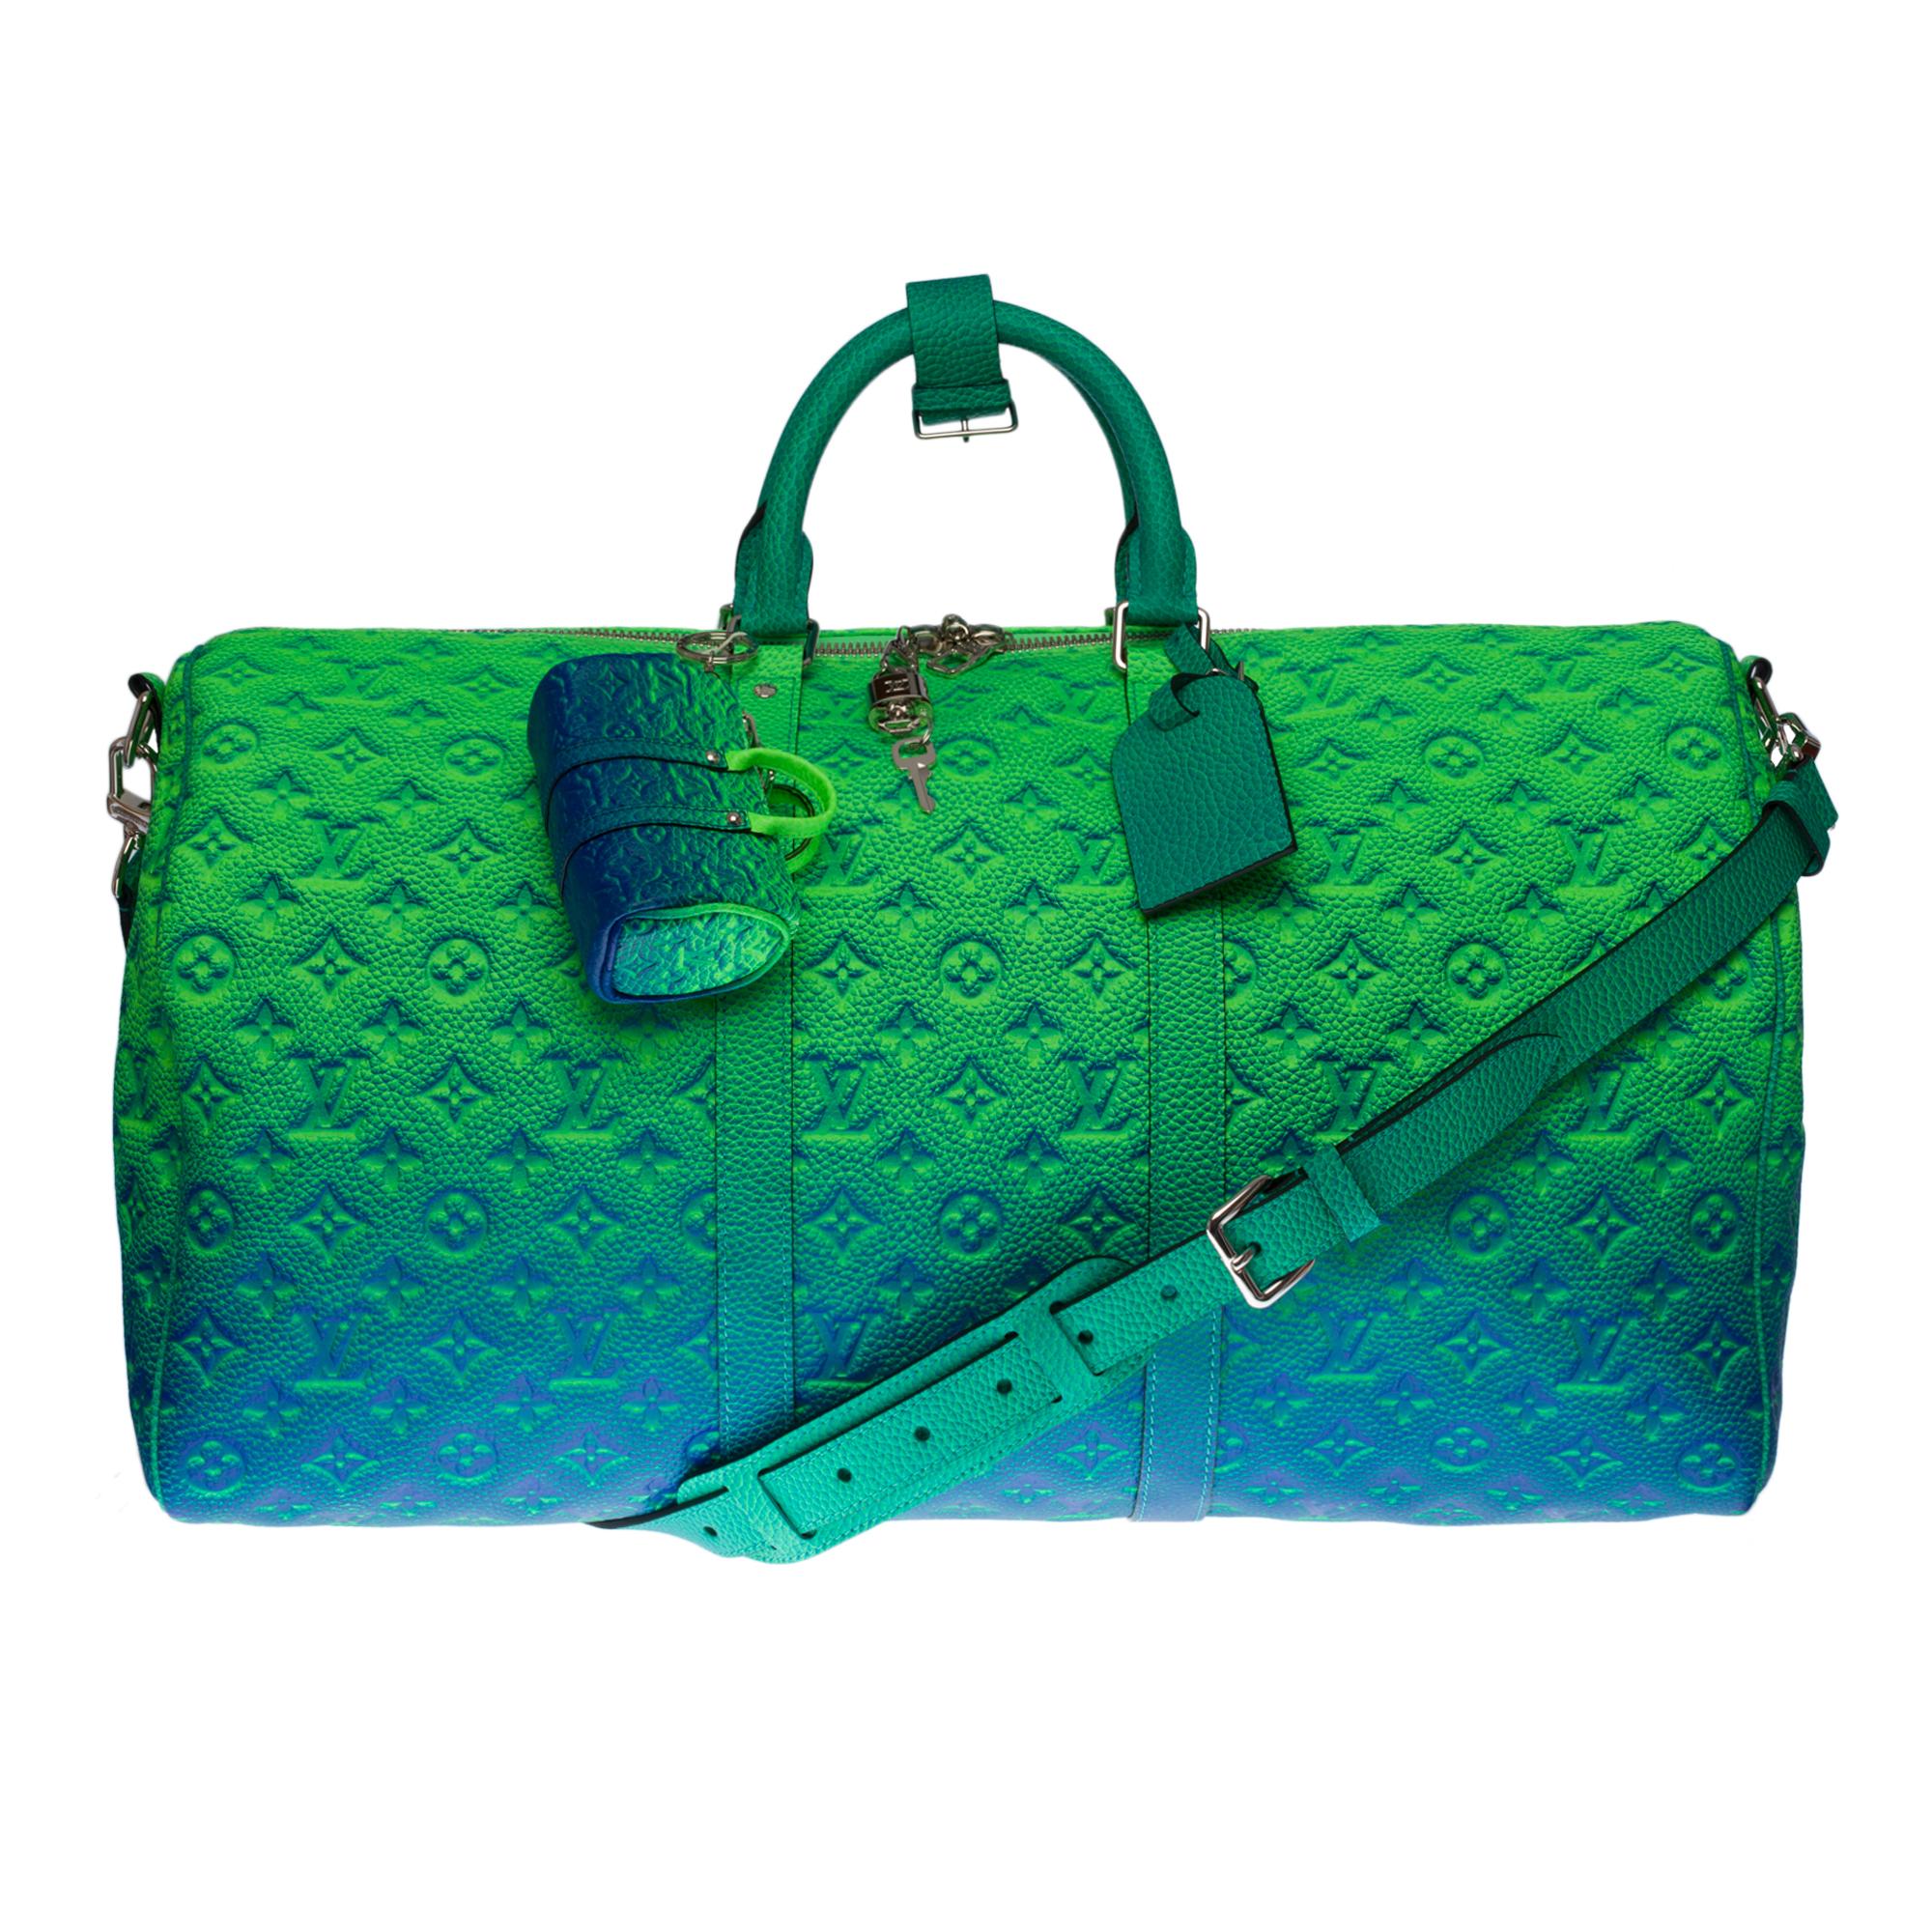 ULTRA EXCLUSIVE - SOLD OUT - LAST VIRGIL ABLOH COLLECTION

With this Keepall Shoulder Bag 50, Virgil Abloh propels a classic model into an opulent world of colors and energy. The fluorescent hues of the Taurillon Illusion leather give a new look to